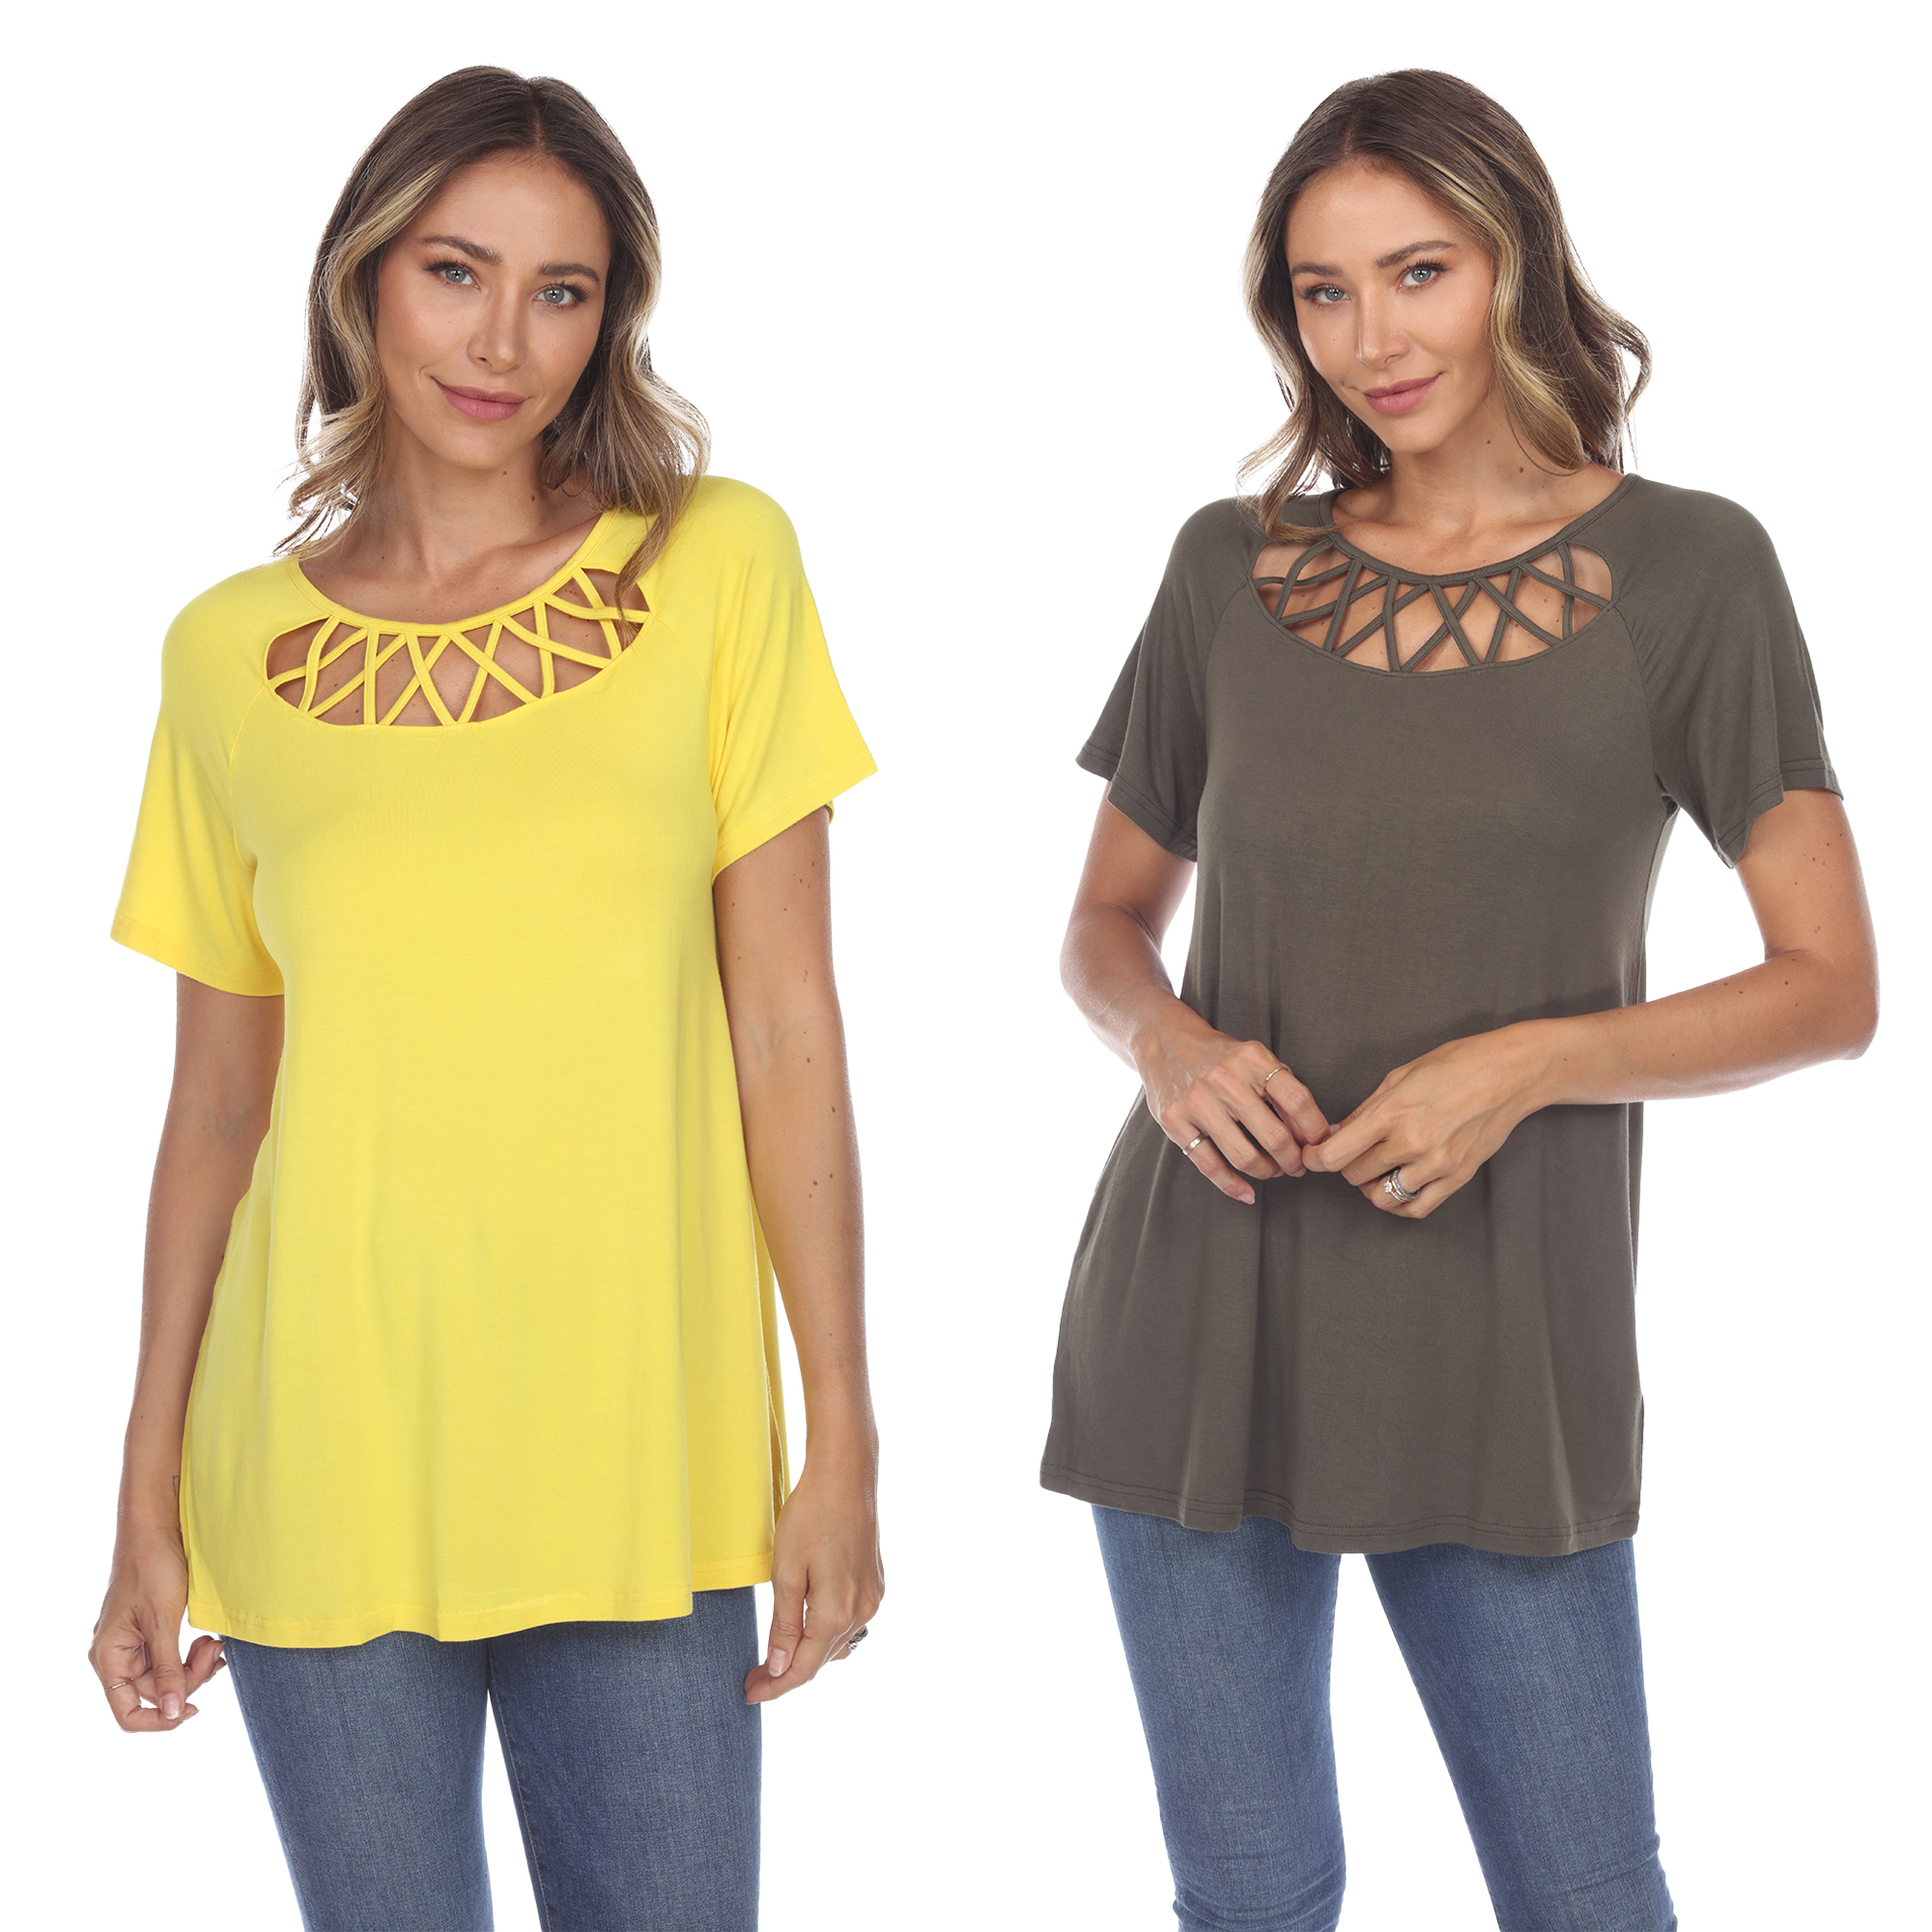 White Mark Women's Pack Of 2 Yellow Crisscross Short Sleeve Top - Yellow Olive, Large